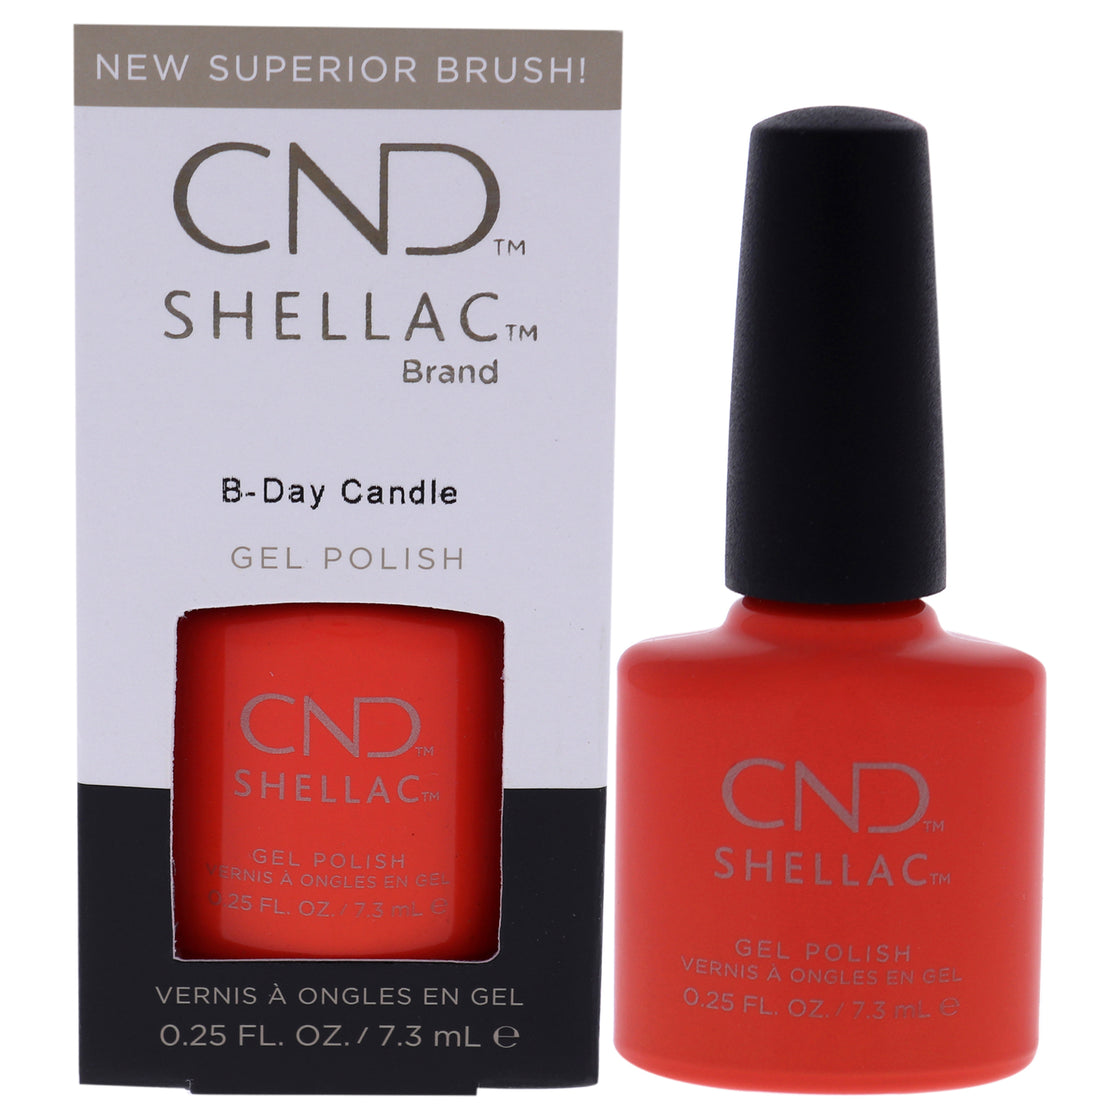 Shellac Nail Color - B-Day Candle by CND for Women - 0.25 oz Nail Polish